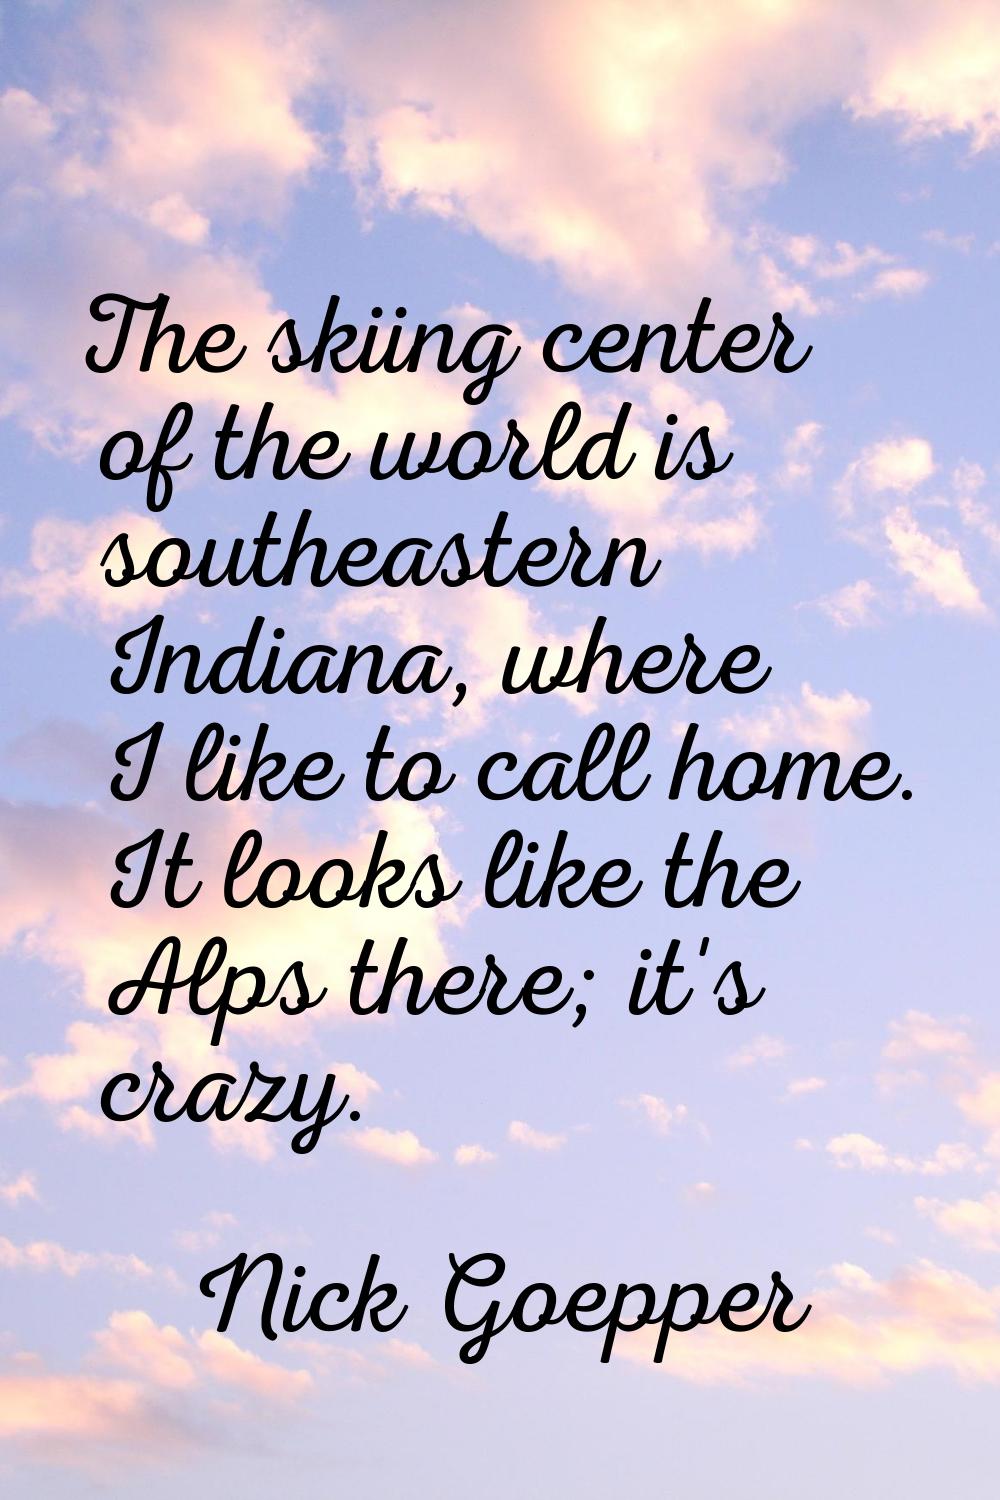 The skiing center of the world is southeastern Indiana, where I like to call home. It looks like th